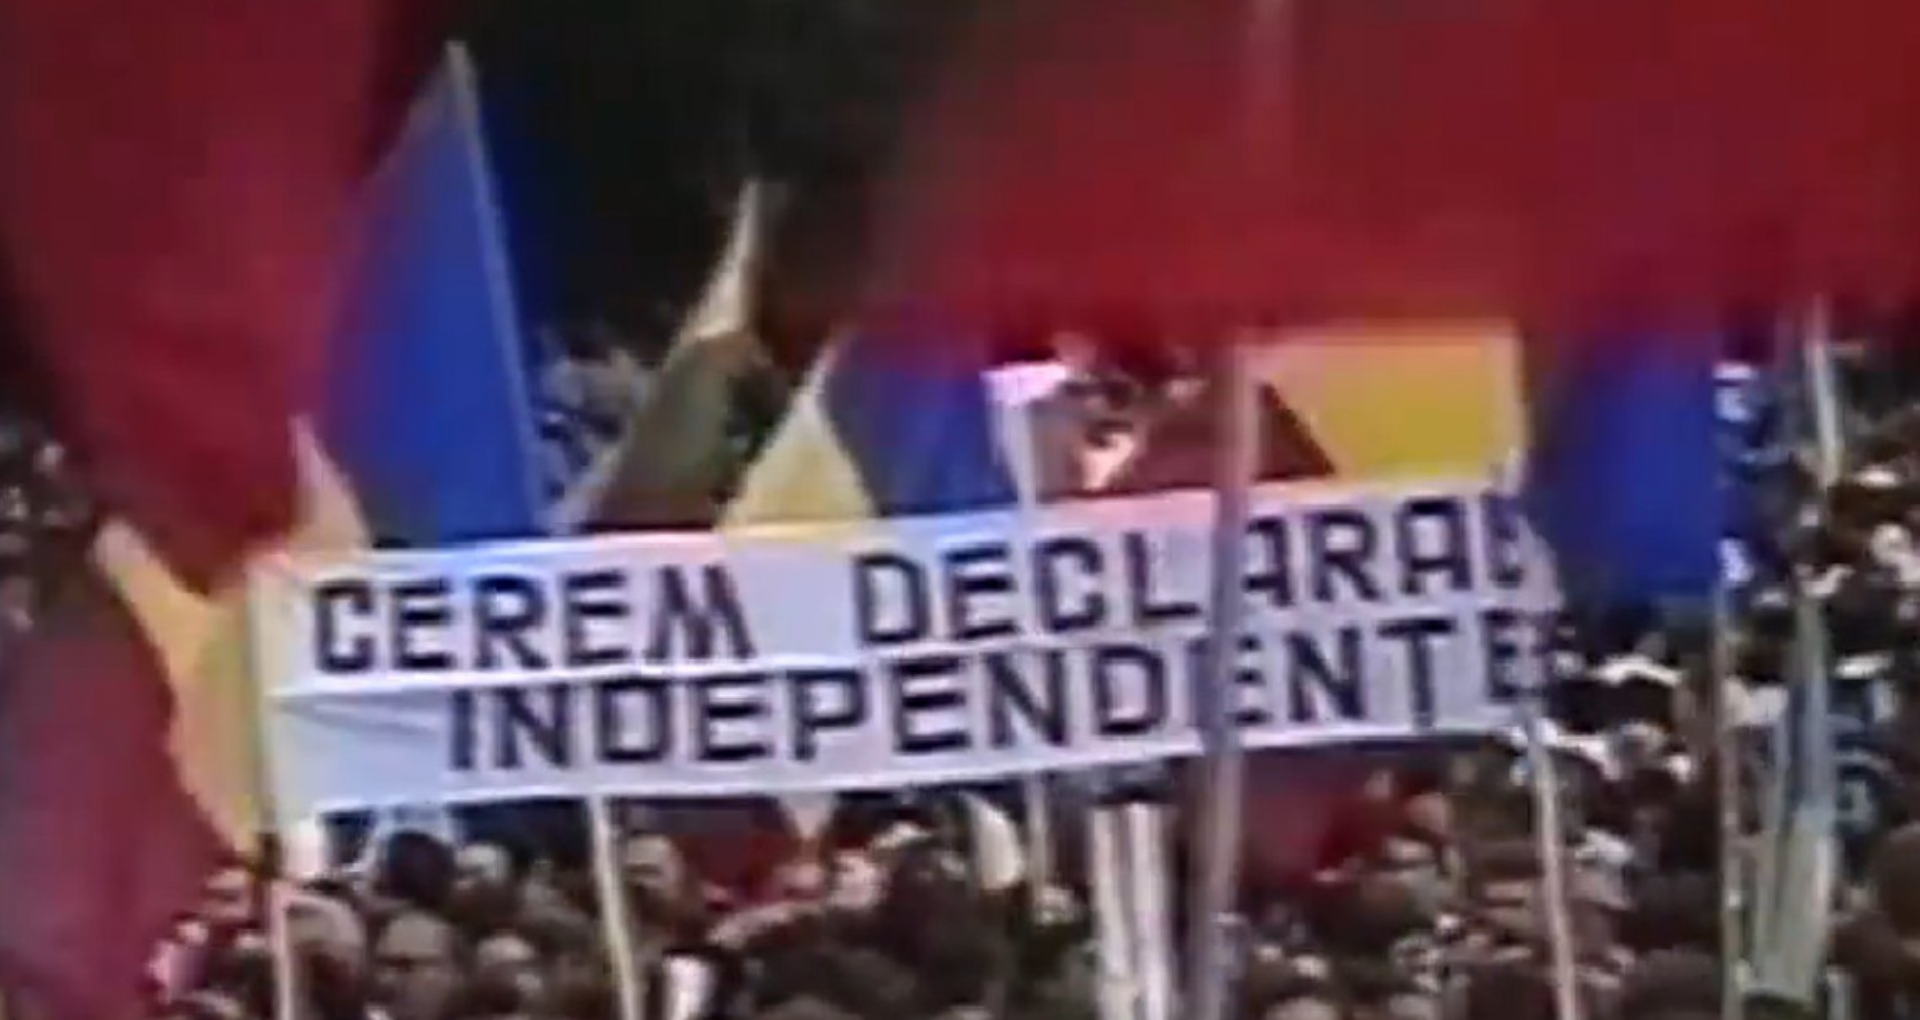 “Moldova’s independence is a fiction”. The war in Ukraine has changed the perception of the word “independence”